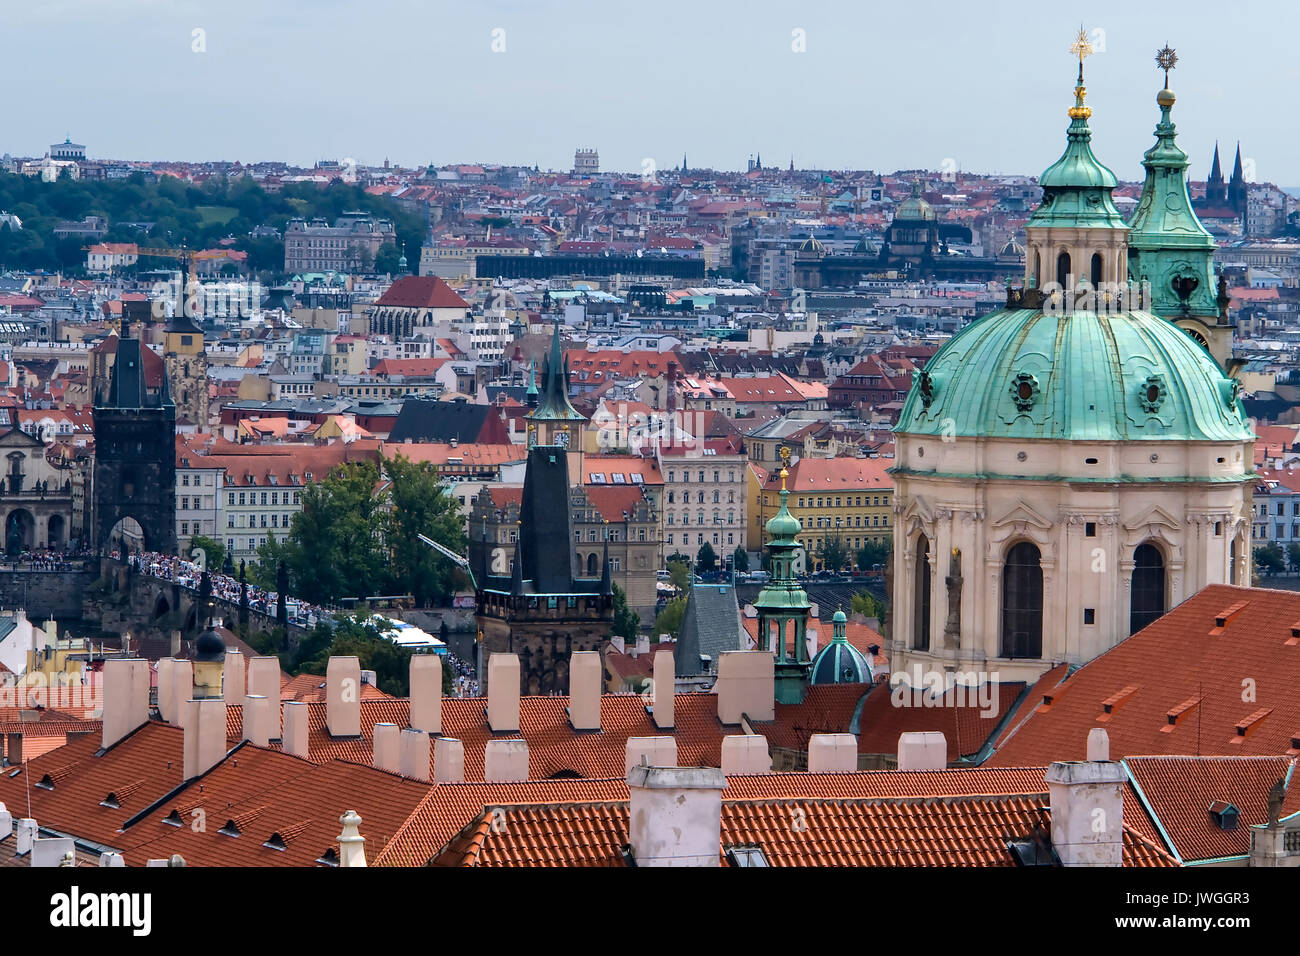 St. Nicolas church and roofs of Prague Stock Photo